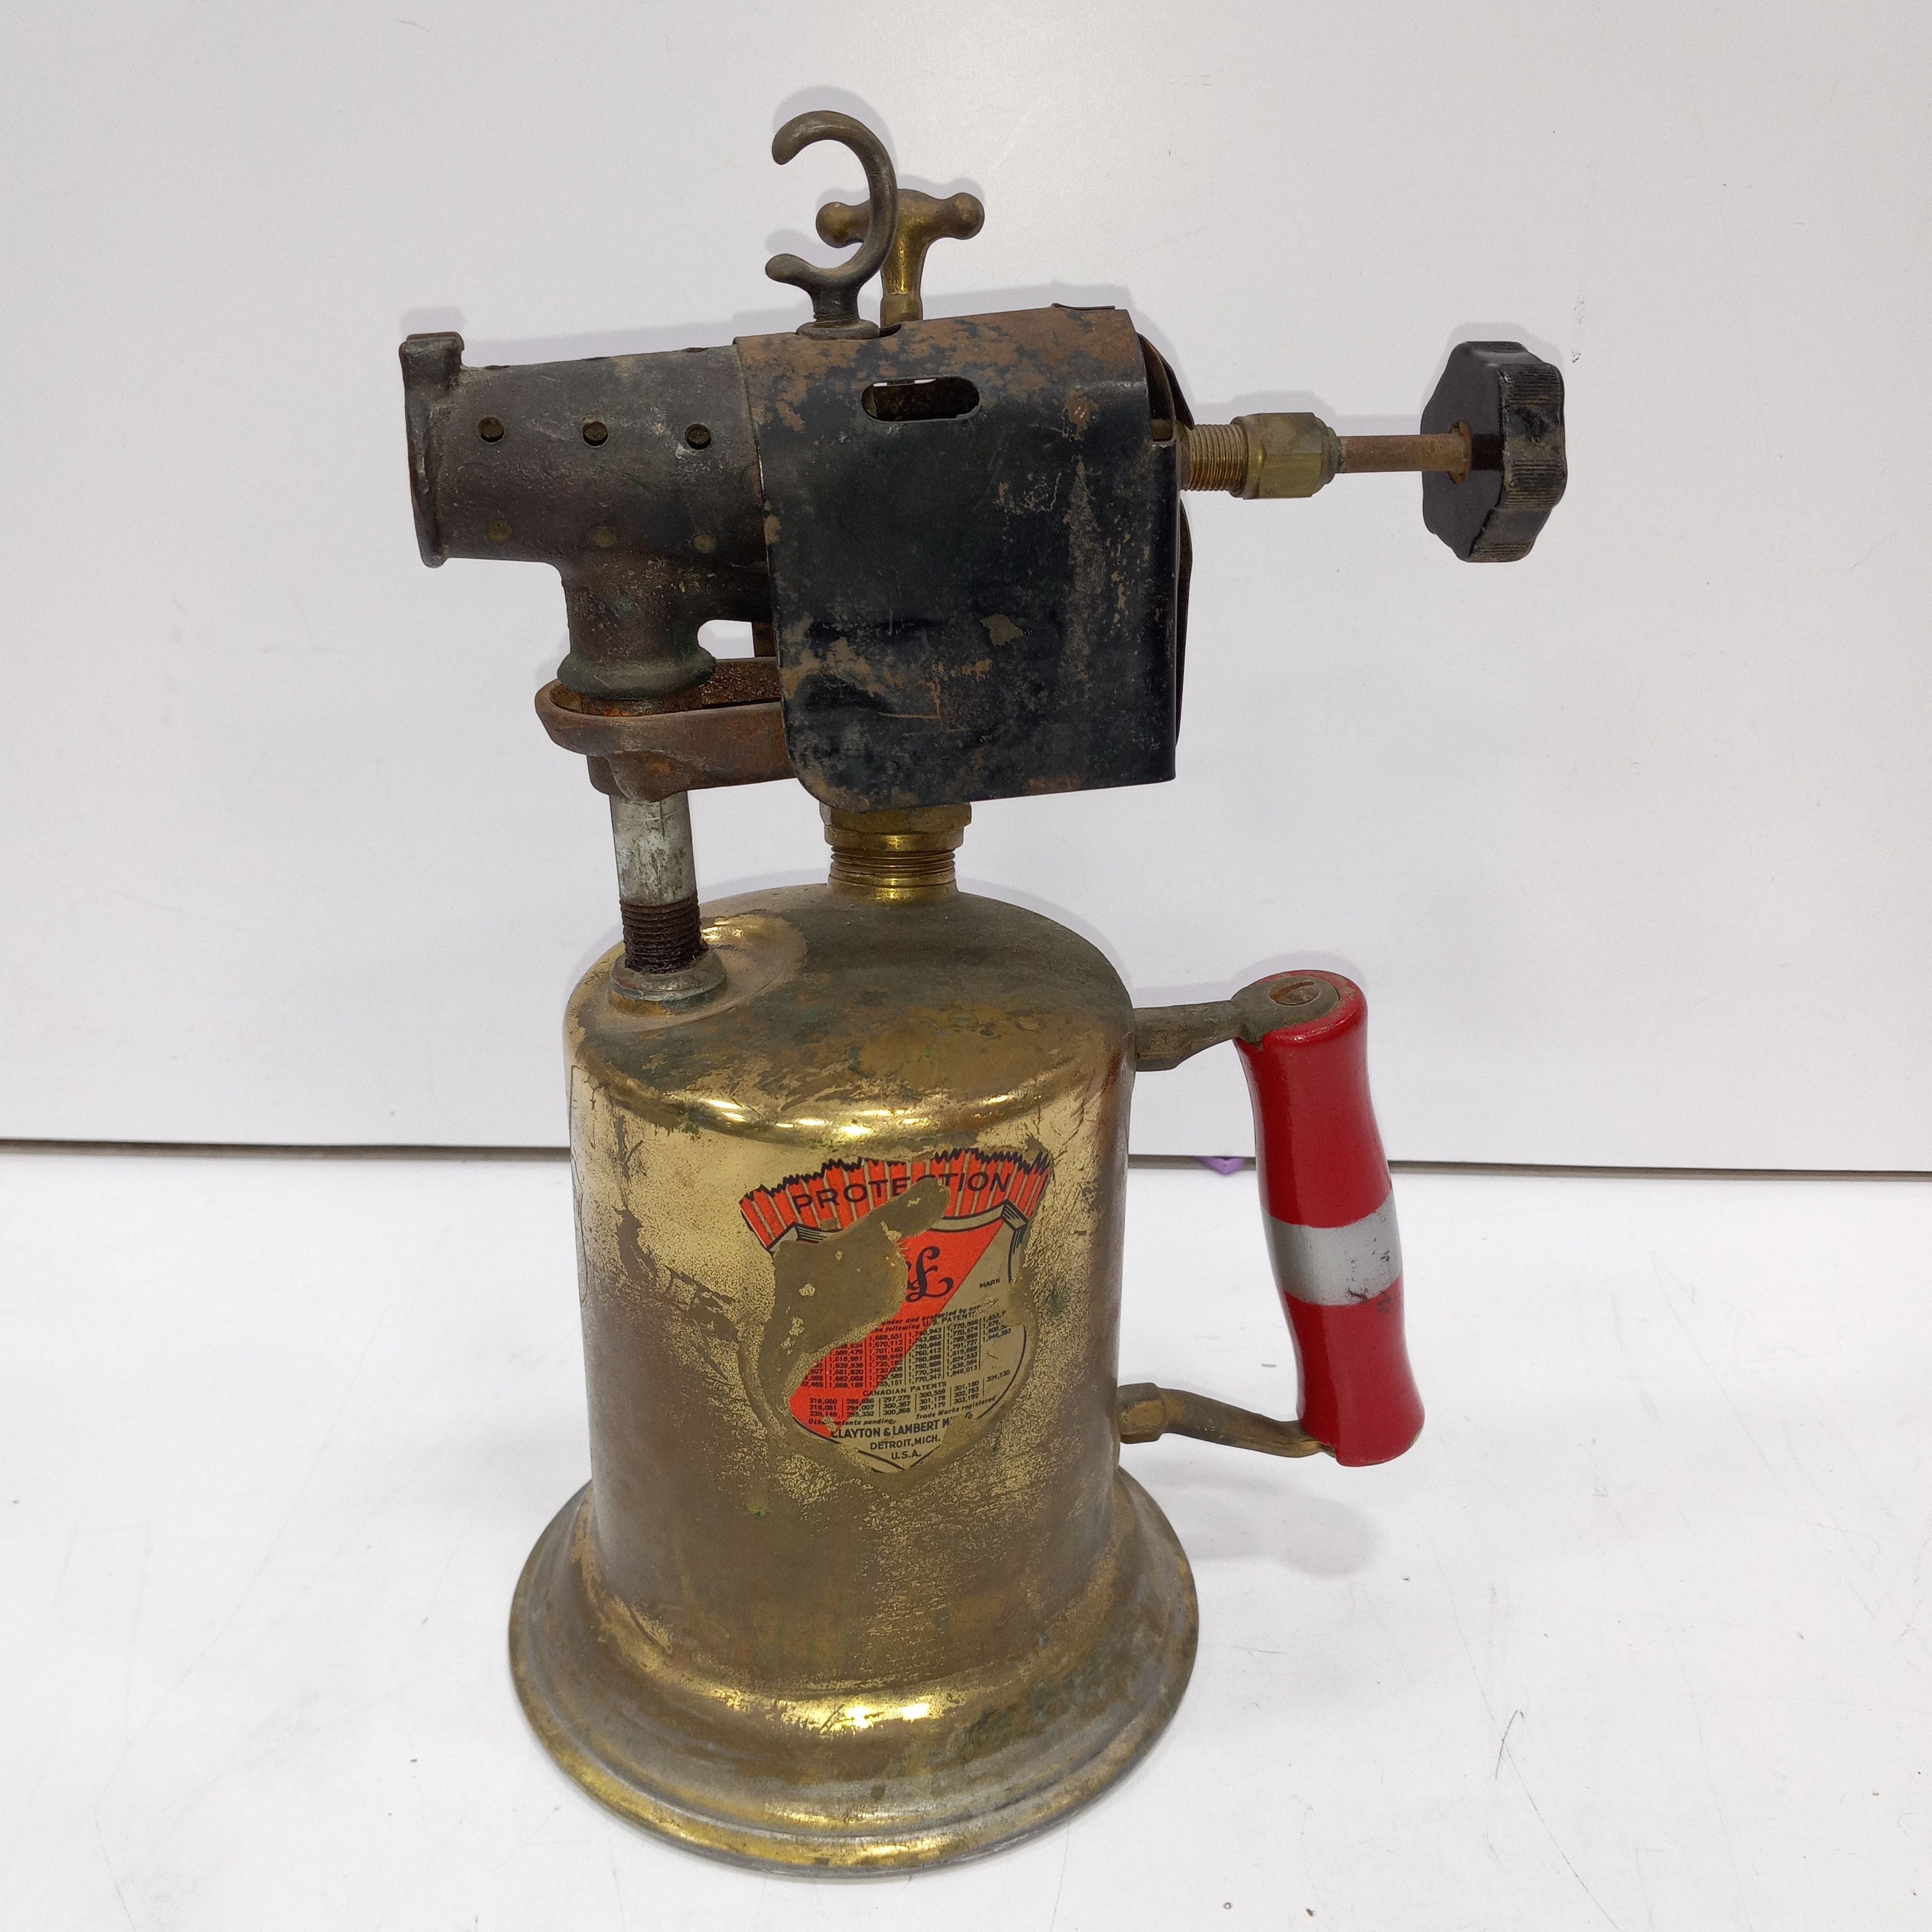 Vintage Turner Brass Works model 30AT Blow Torch with Label and